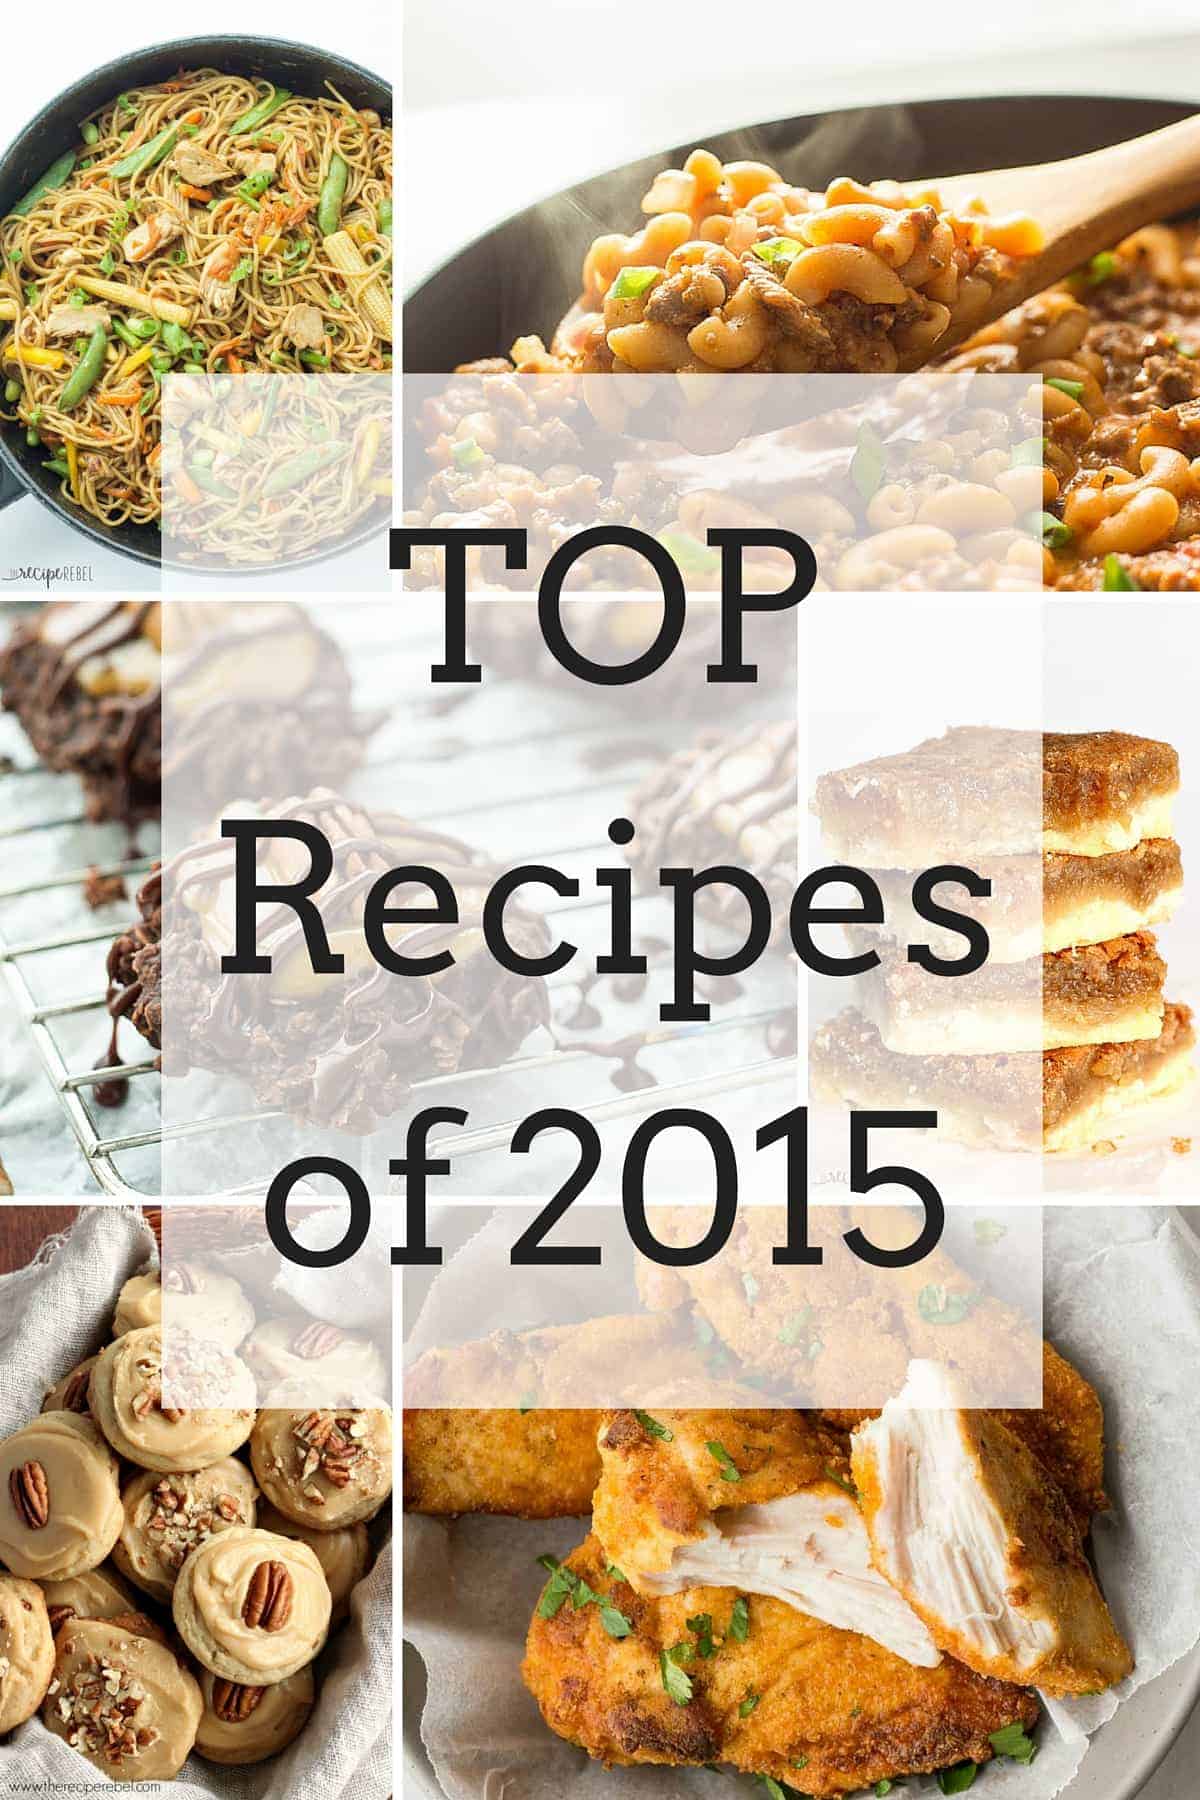 top 10 recipes of 2015 collage with multiple images and title overlay